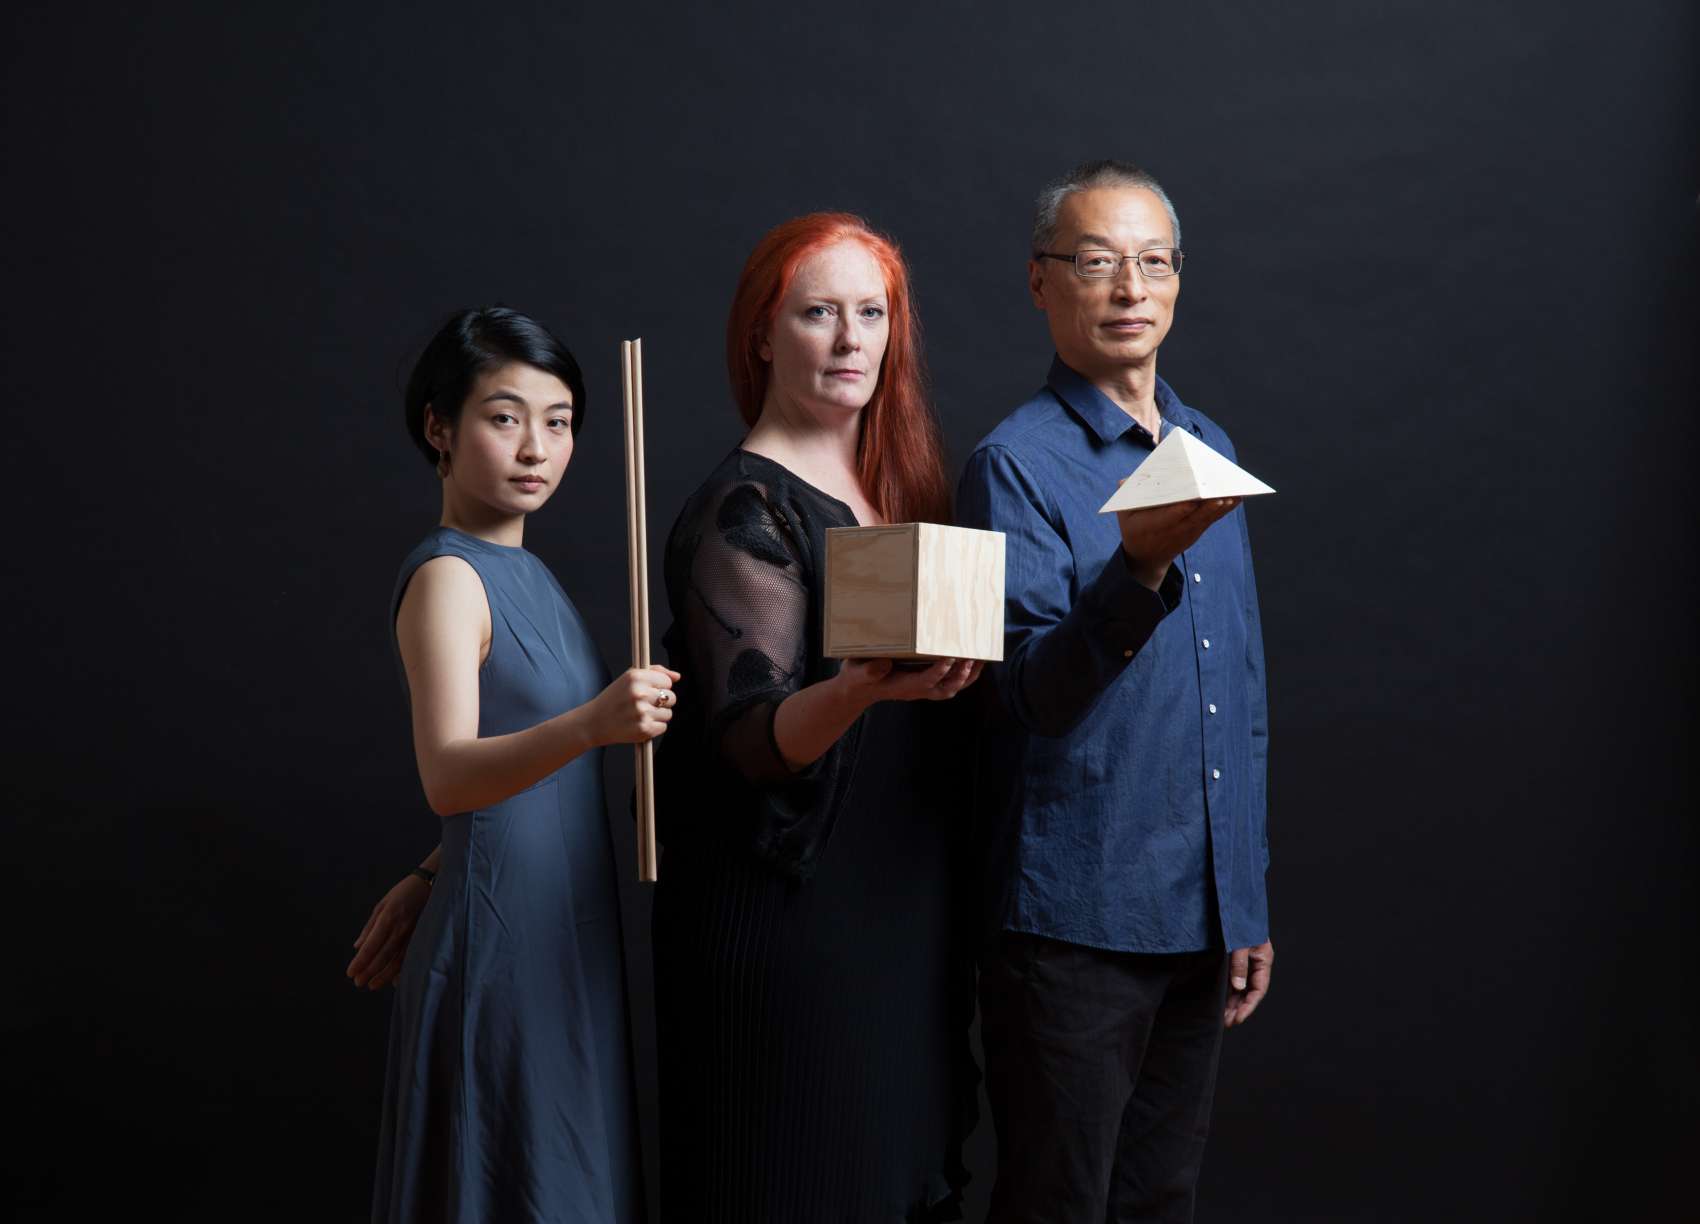 Three performers holding wooden objects standing against a black background